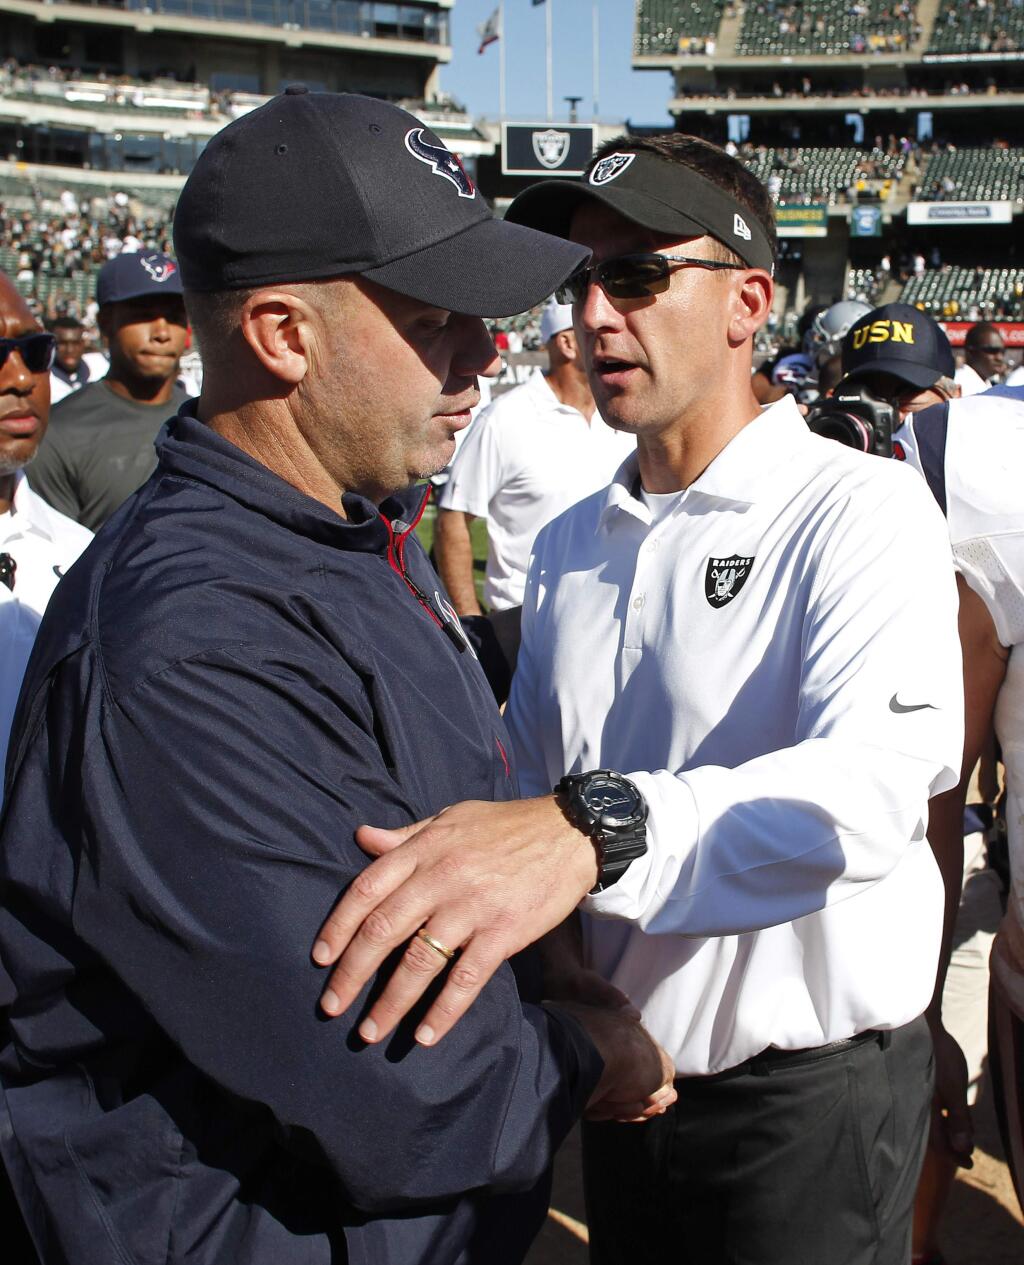 Houston Texans head coach Bill O'Brien, left, and Oakland Raiders head coach Dennis Allen, right, greet each other at the end of an NFL football game Sunday, Sept. 14, 2014, in Oakland, Calif. Houston won the game 30-14. (AP Photo/Beck Diefenbach)